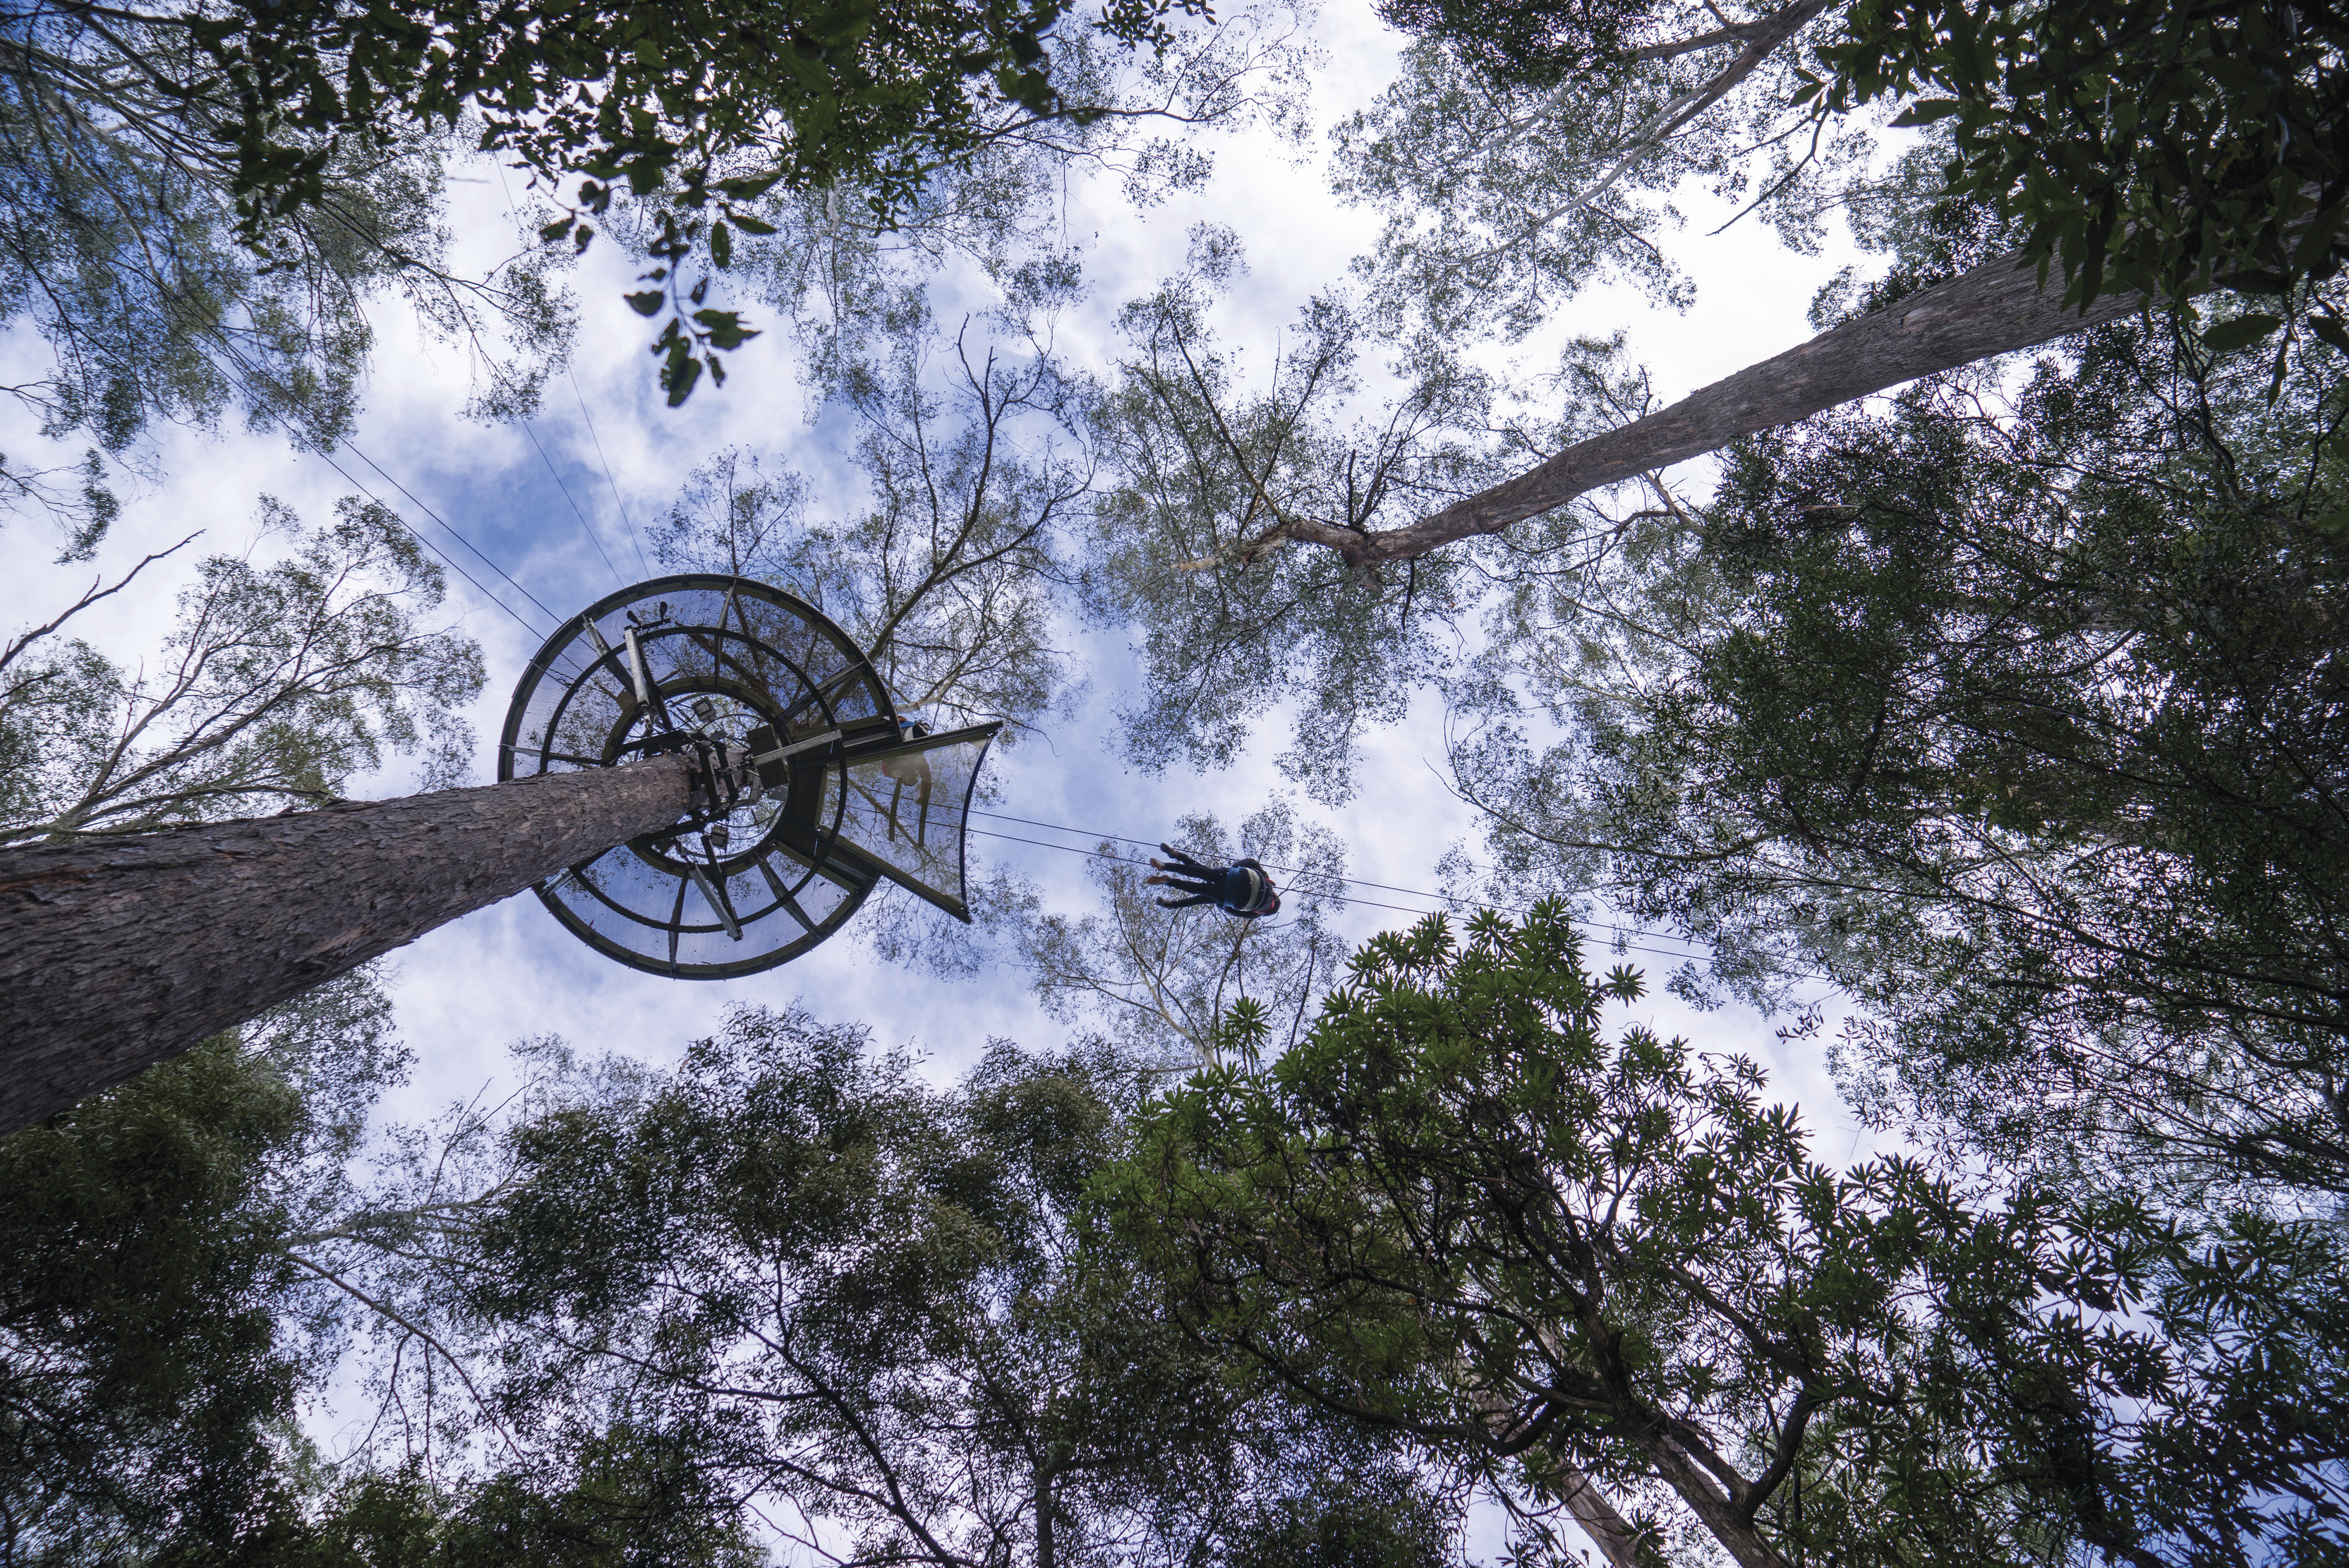 Taken from the ground looking up at a traveller enjoying a tree top adventure at Hollybank Wilderness Adventures.